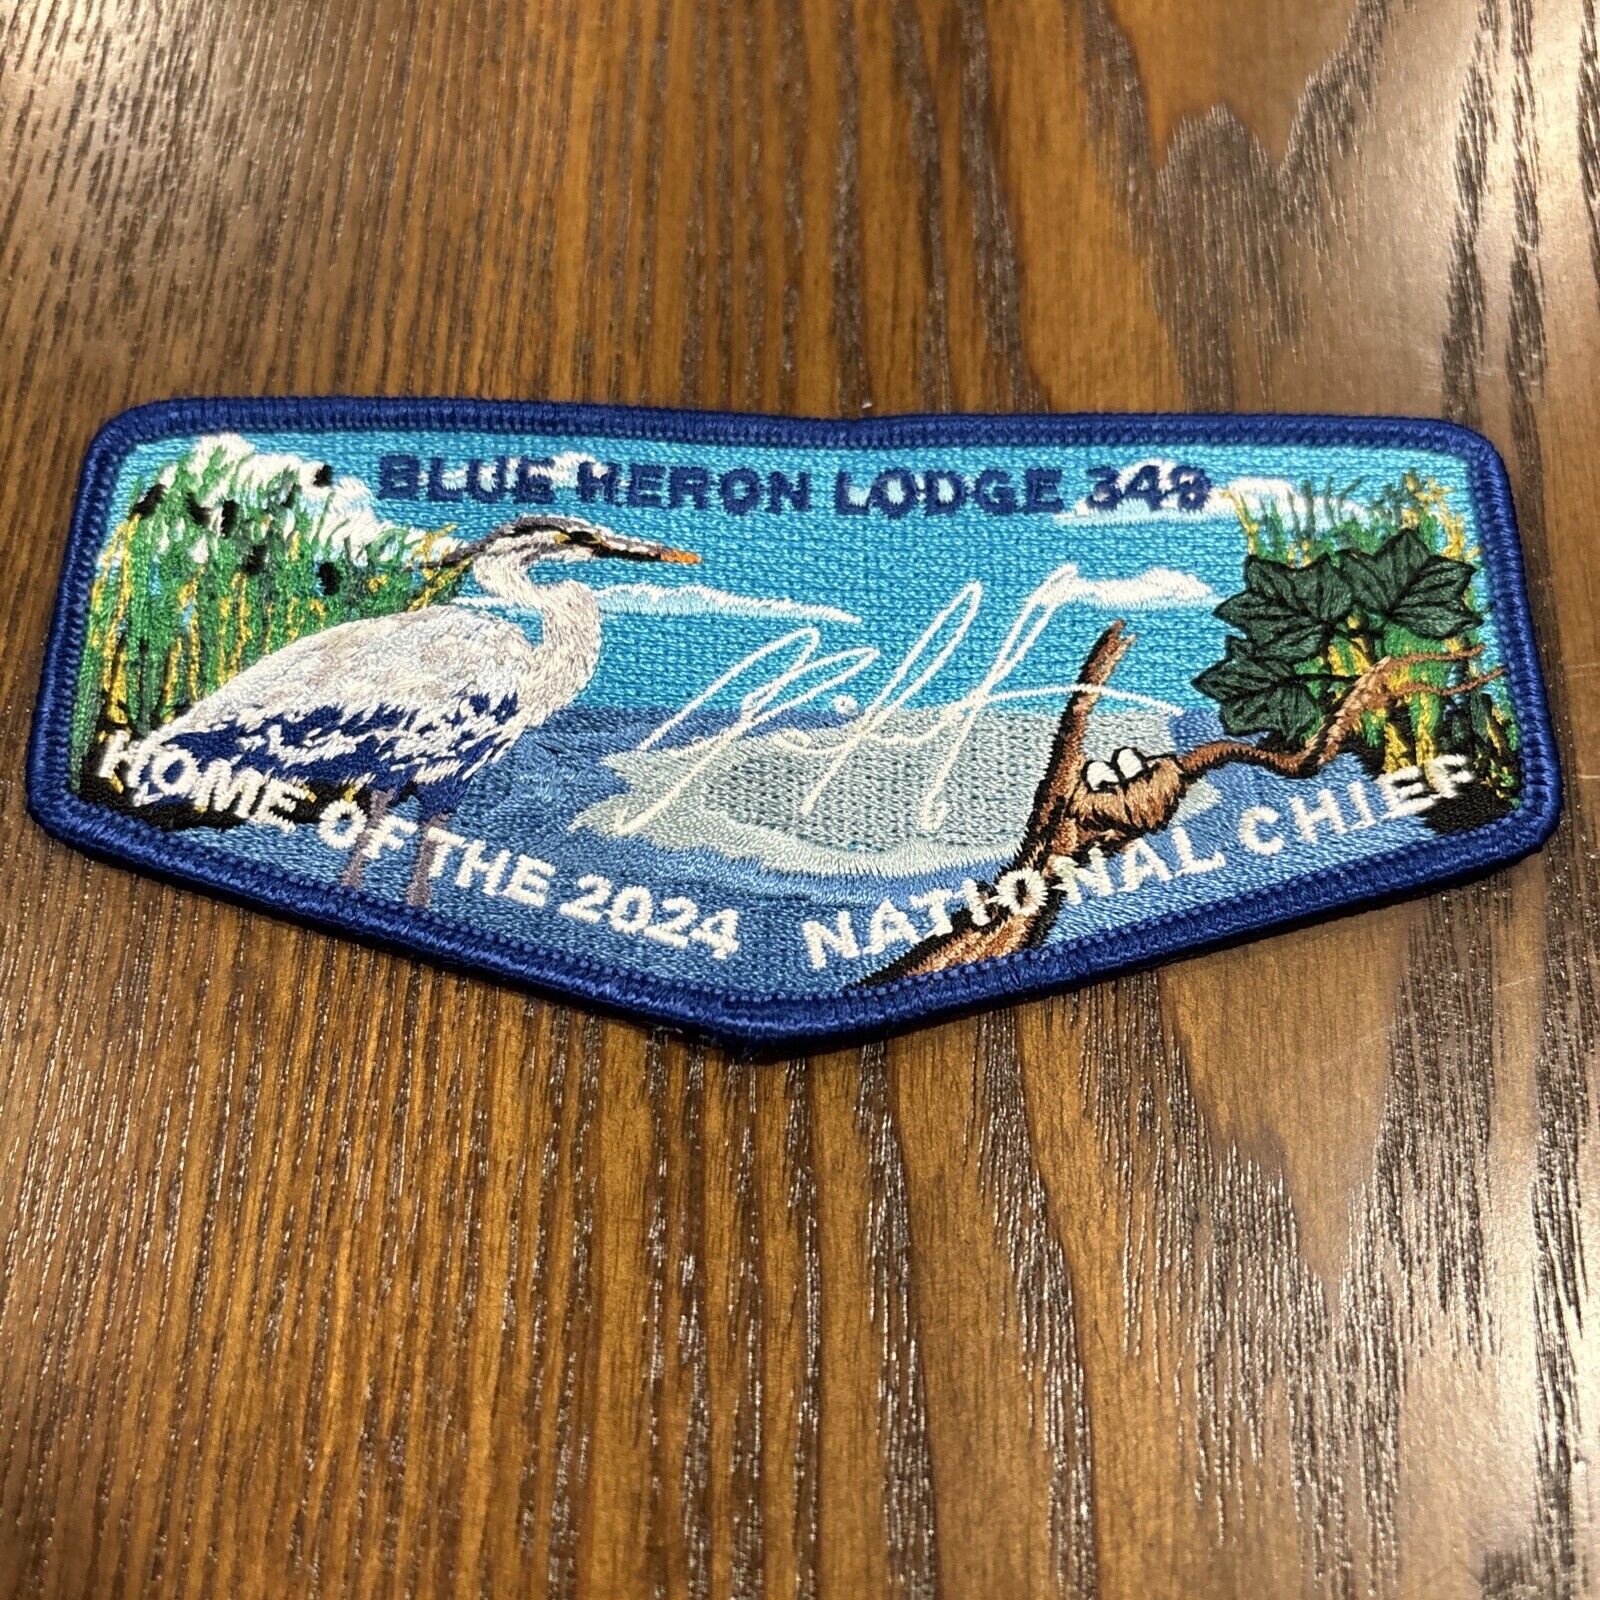 Blue Heron Lodge 349 S? Home Of The 2024 National Chief David Gosik Blue